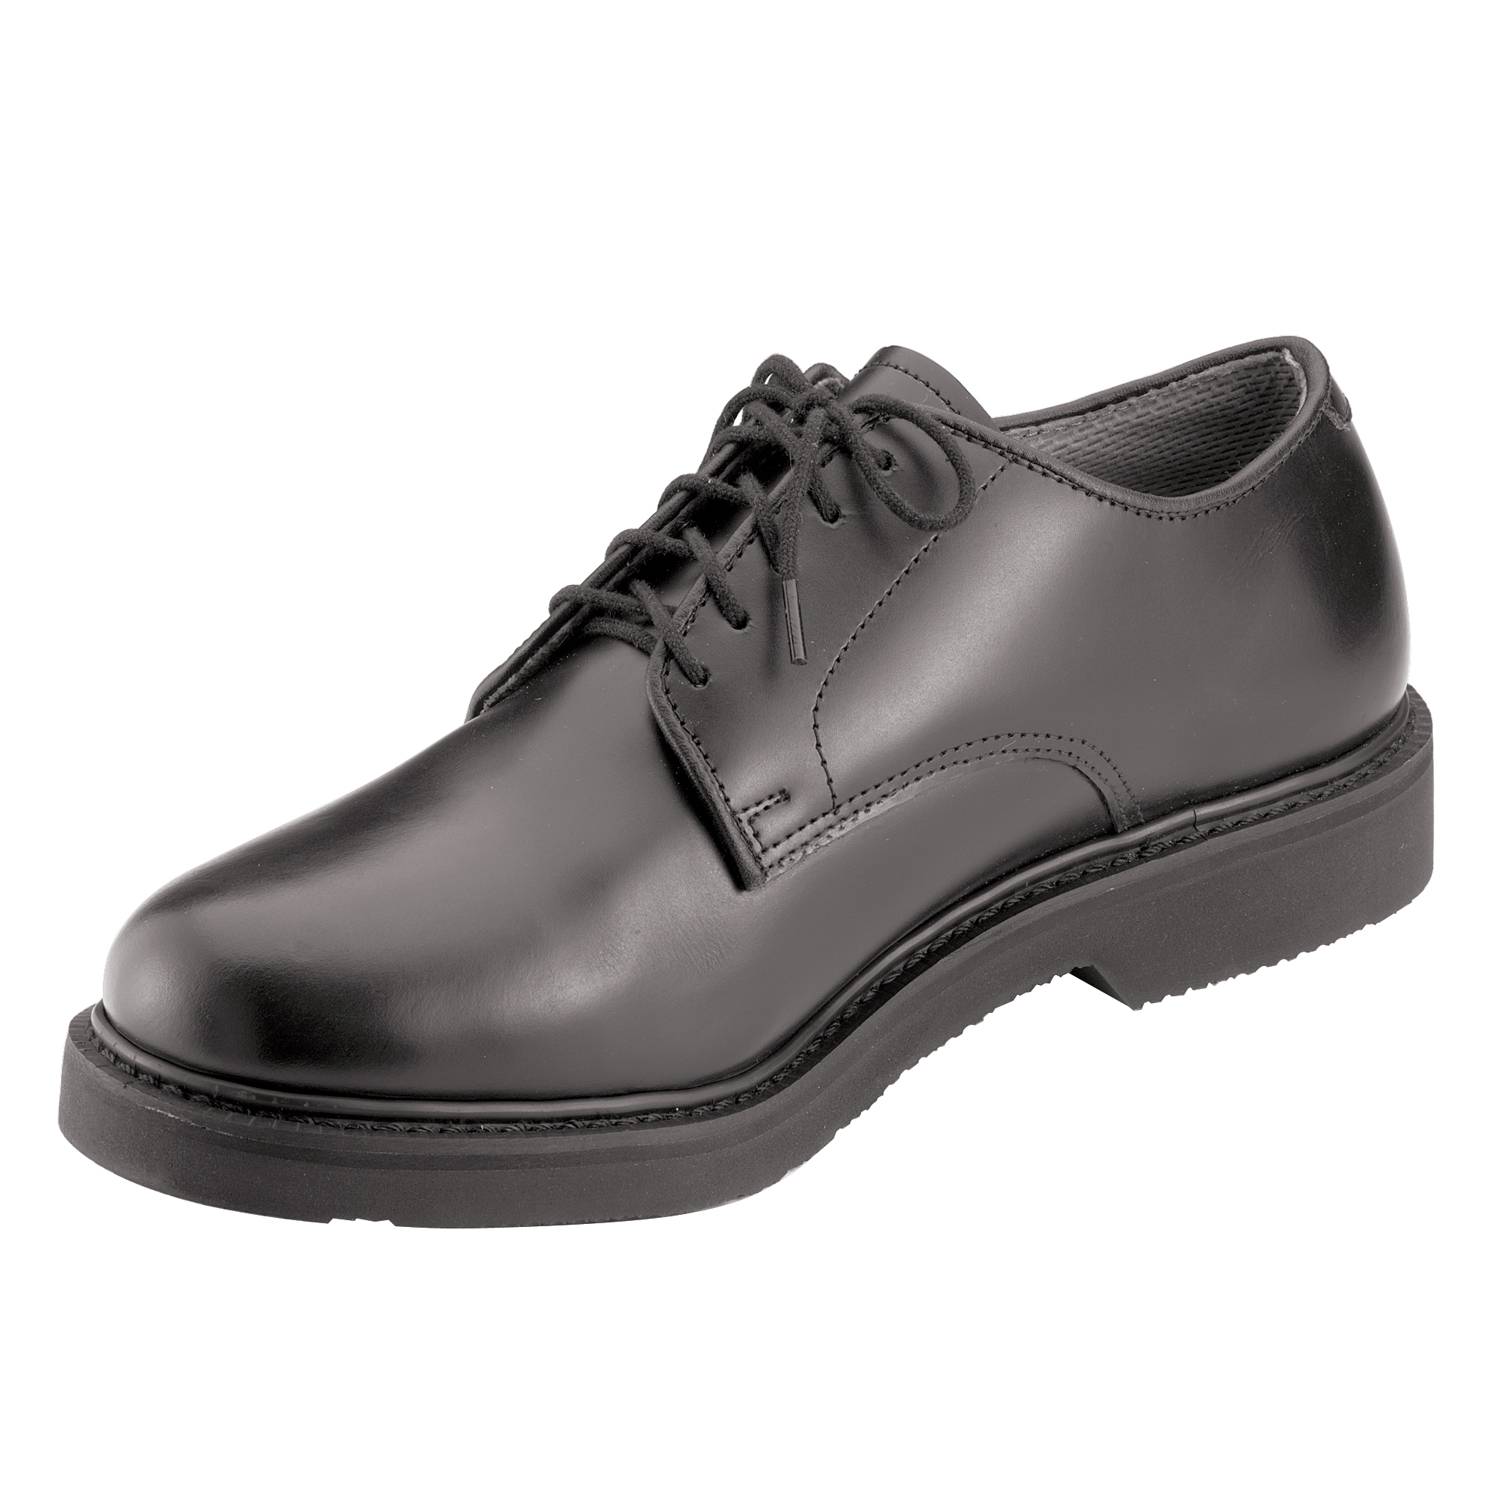 Rothco Uniform Leather Oxfords Dress Shoes